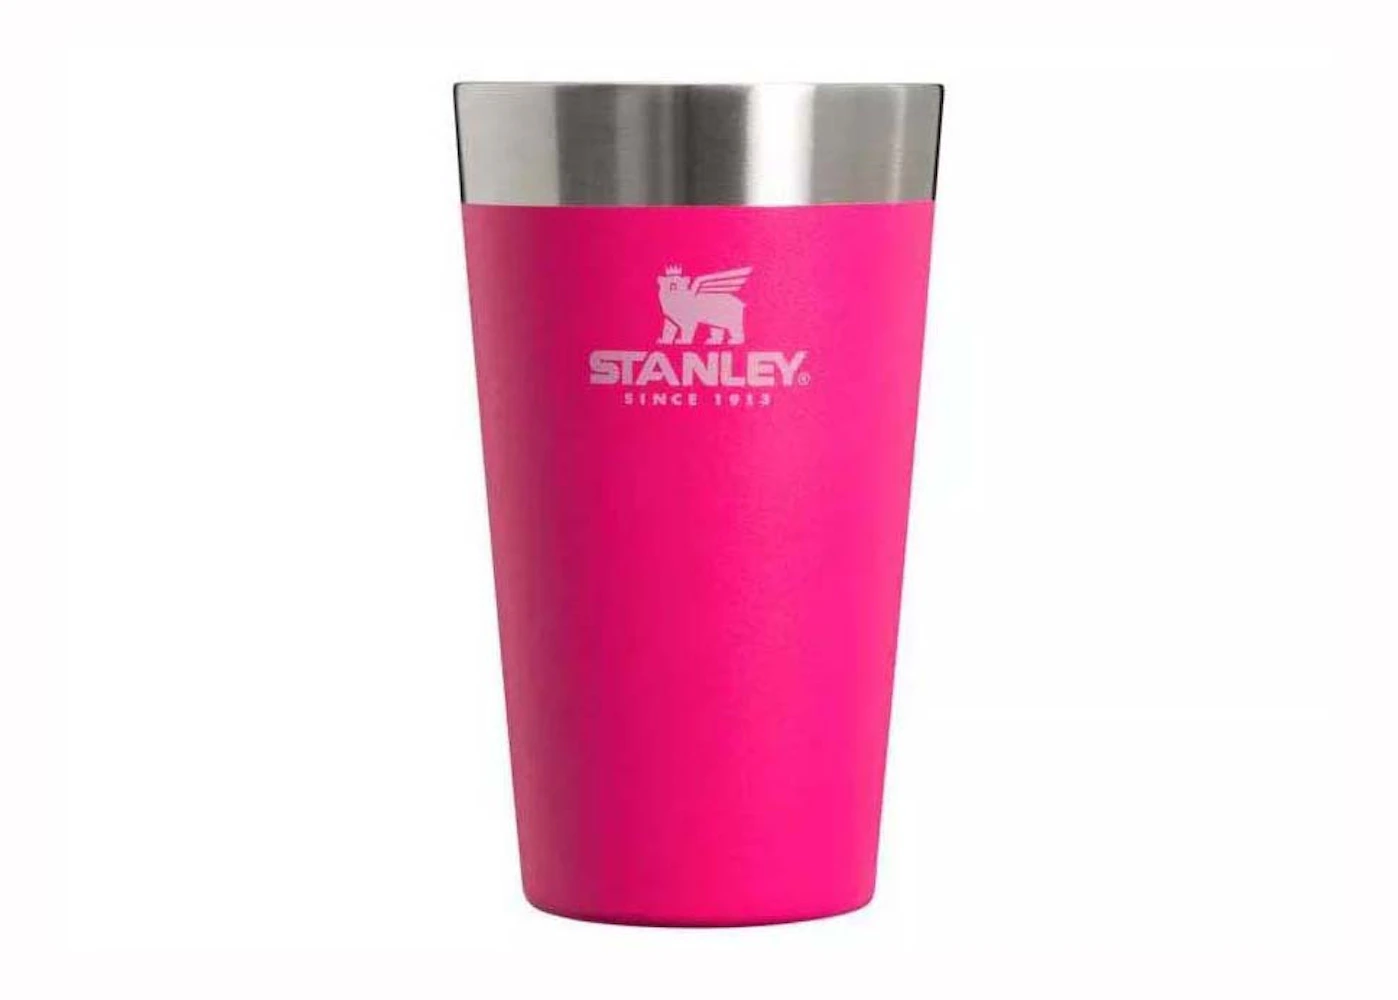 Limited Edition Cosmo Pink Tumbler Mug Perfect For Valentines Day & Spring  Gifts! From Puppyhome, $0.12